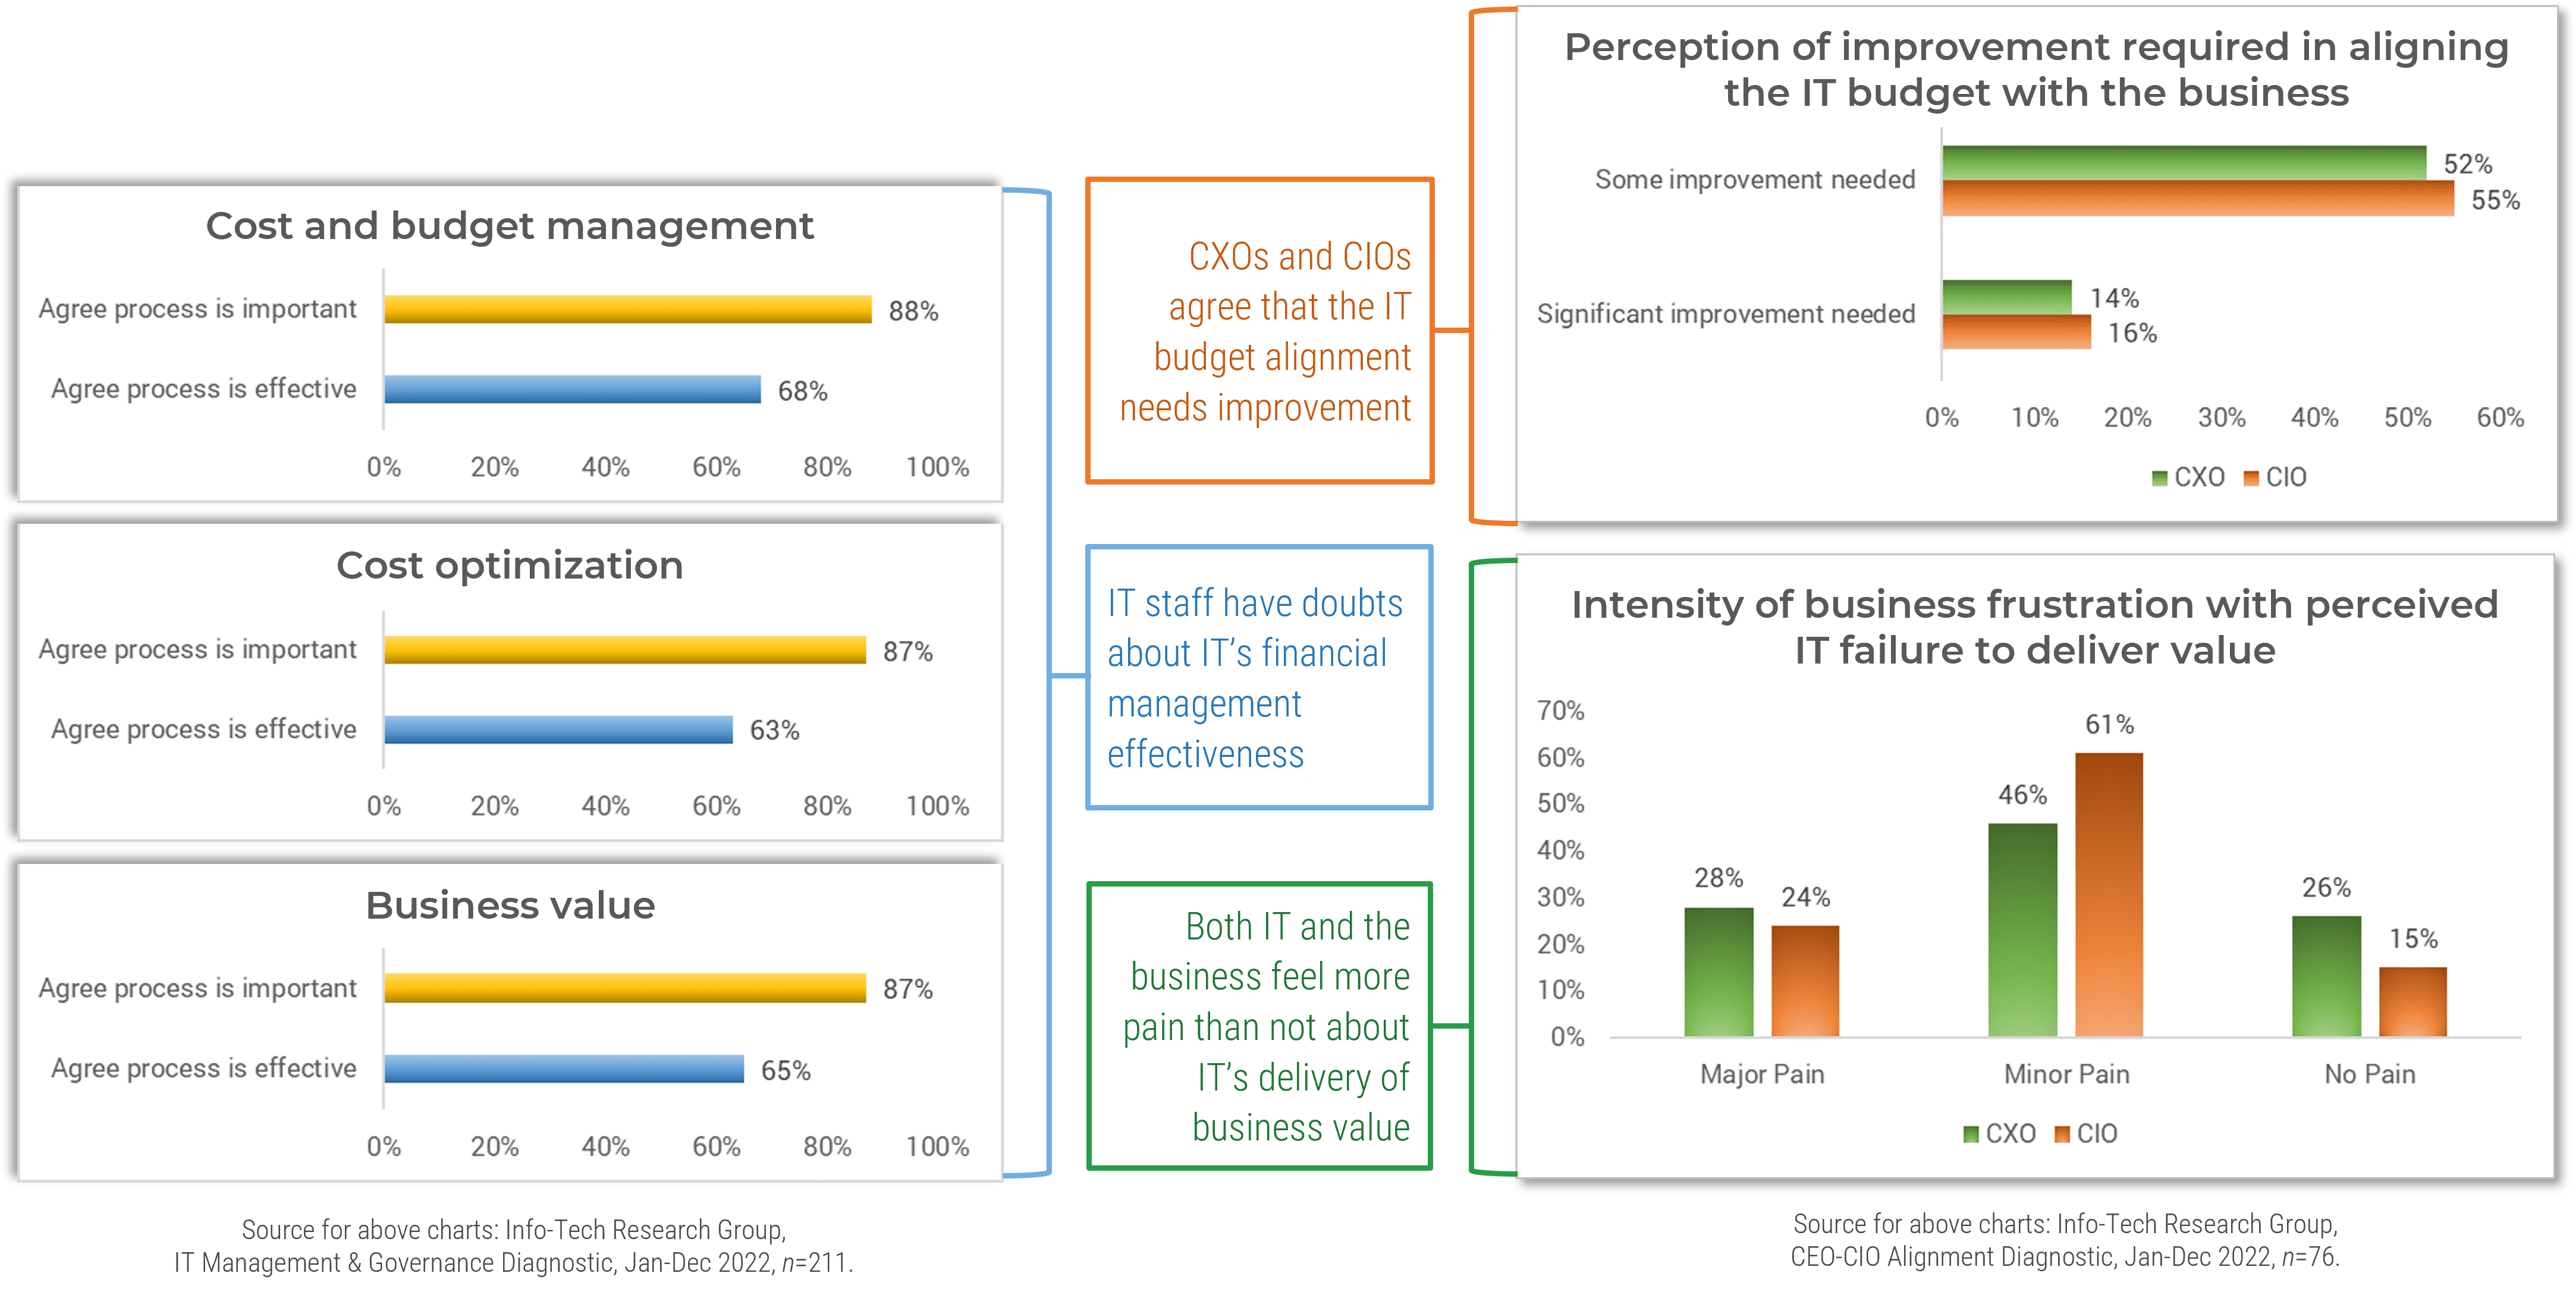 The image contains a screenshot of five graphs. The graphs depict Cost and budget management, Cost optimization, Business value, perception of improvement, and intensity of business frustration.